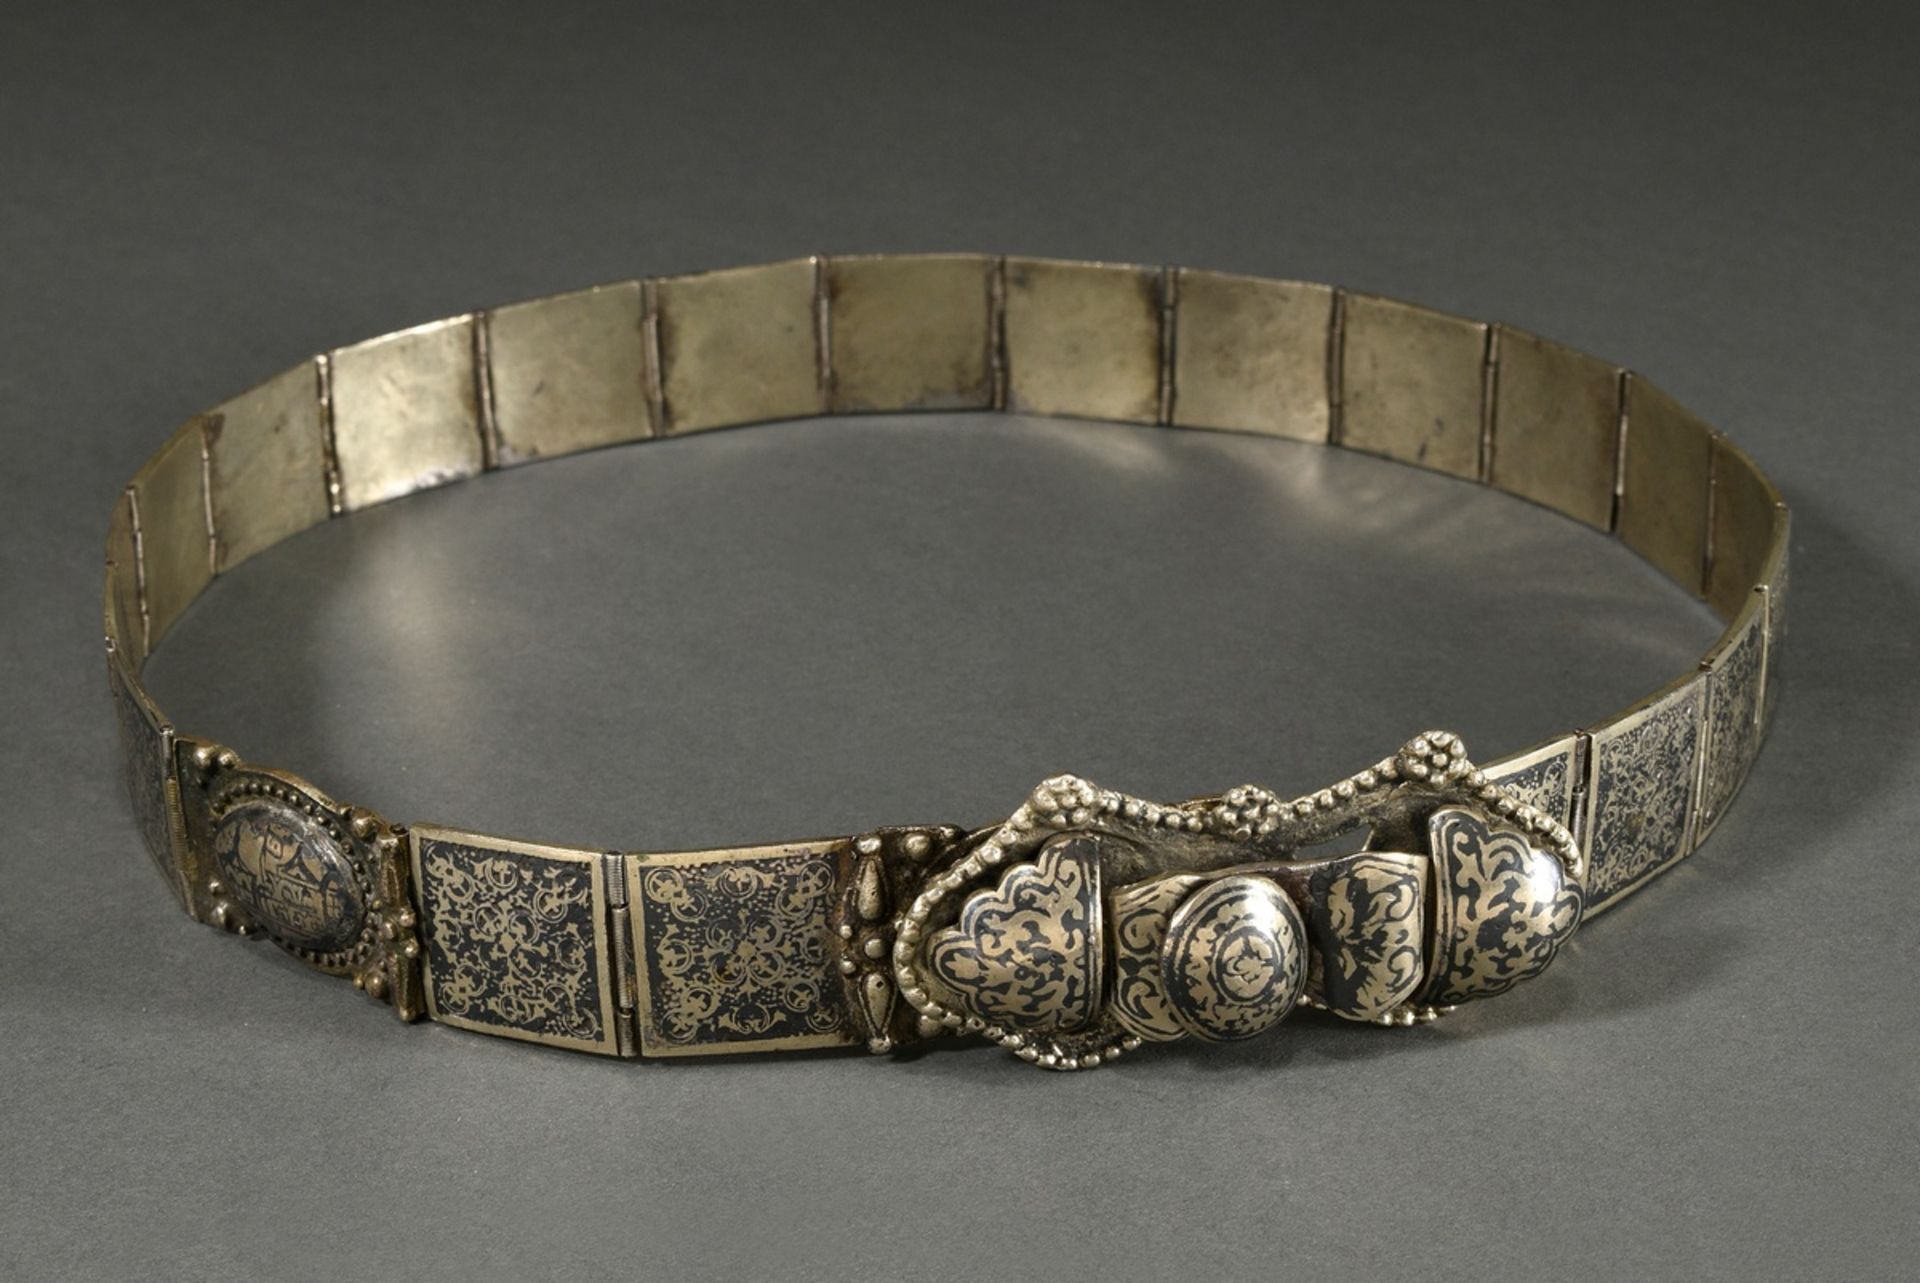 Russian women's belt with tendril decoration in niello work as well as soldered beads and multi-lin